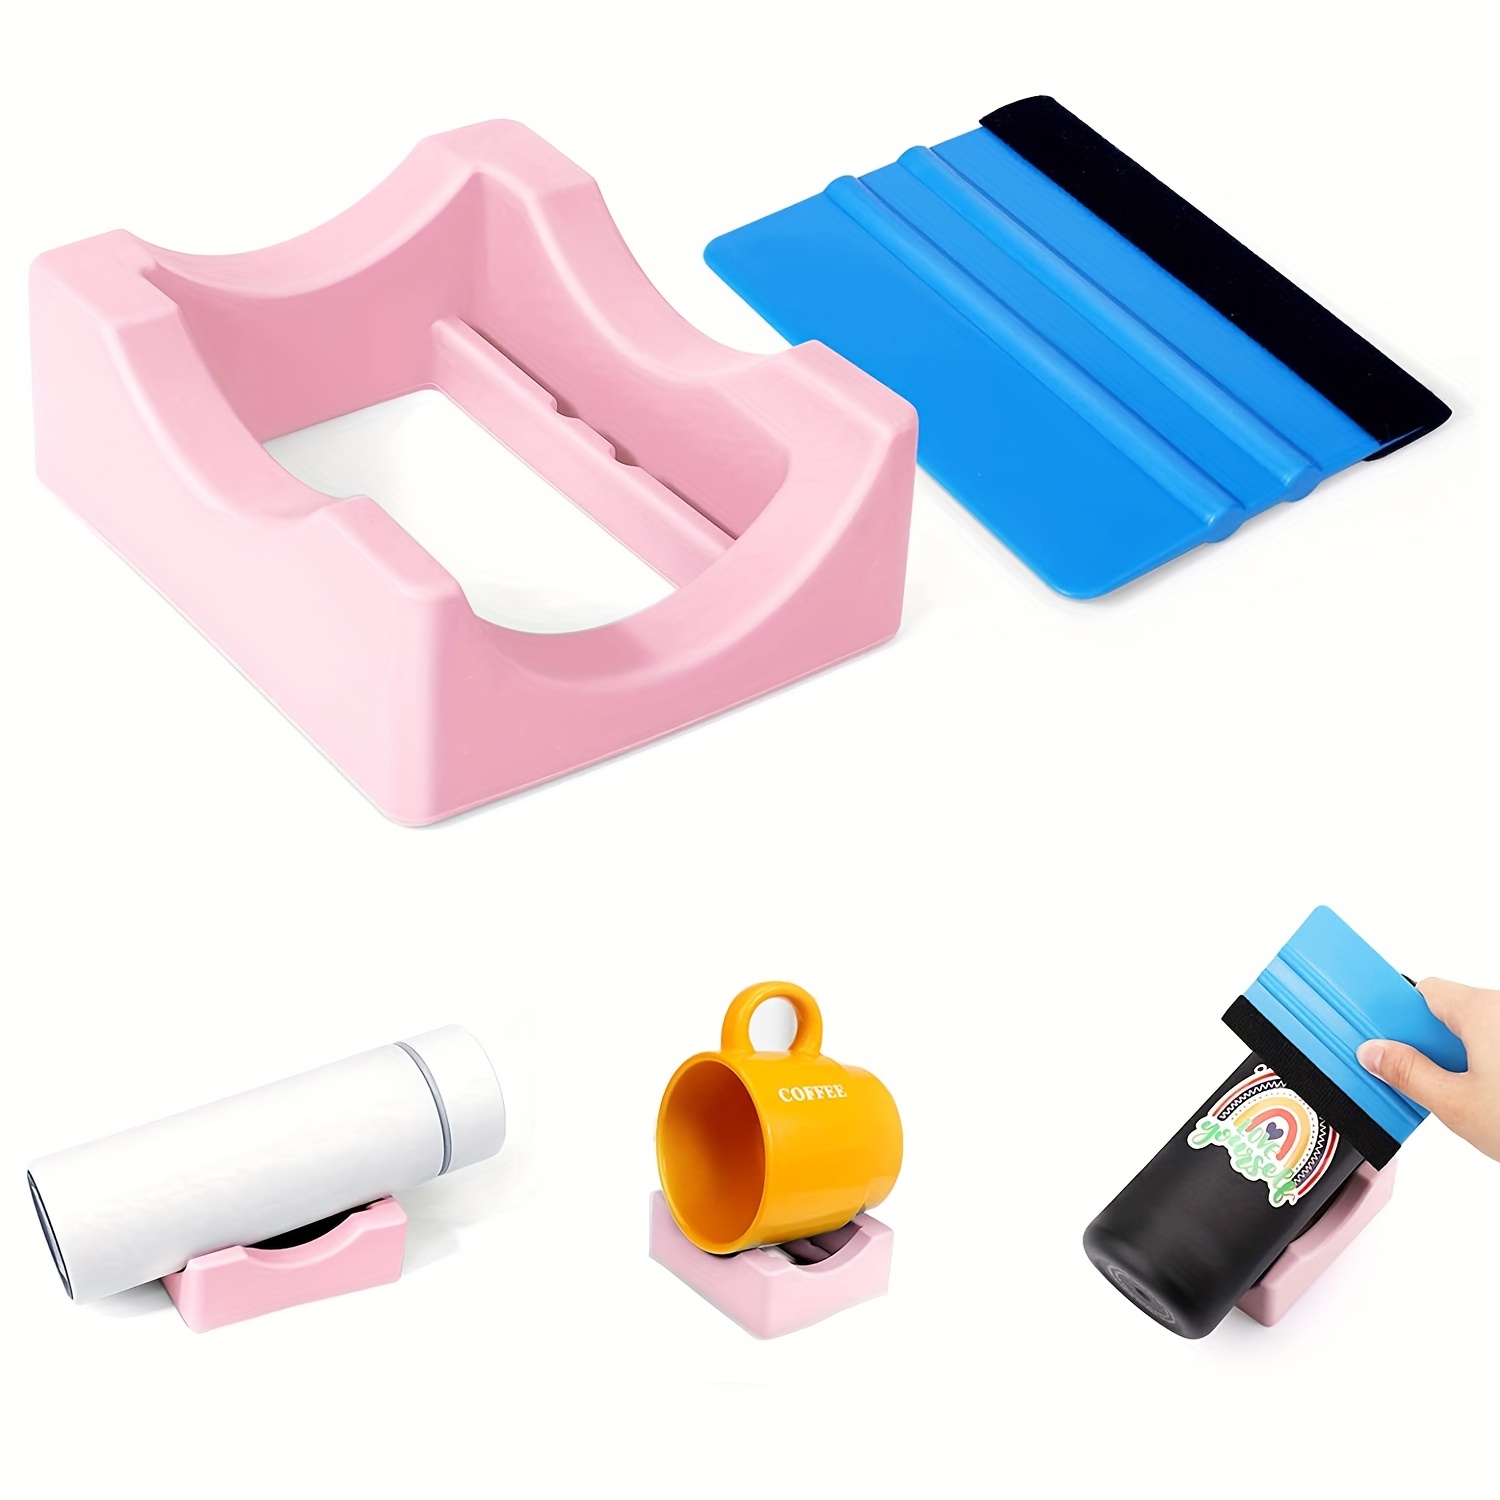 Qianha Mall Cup Cradle for Tumblers, Non Slip Silicone Cup Cradle